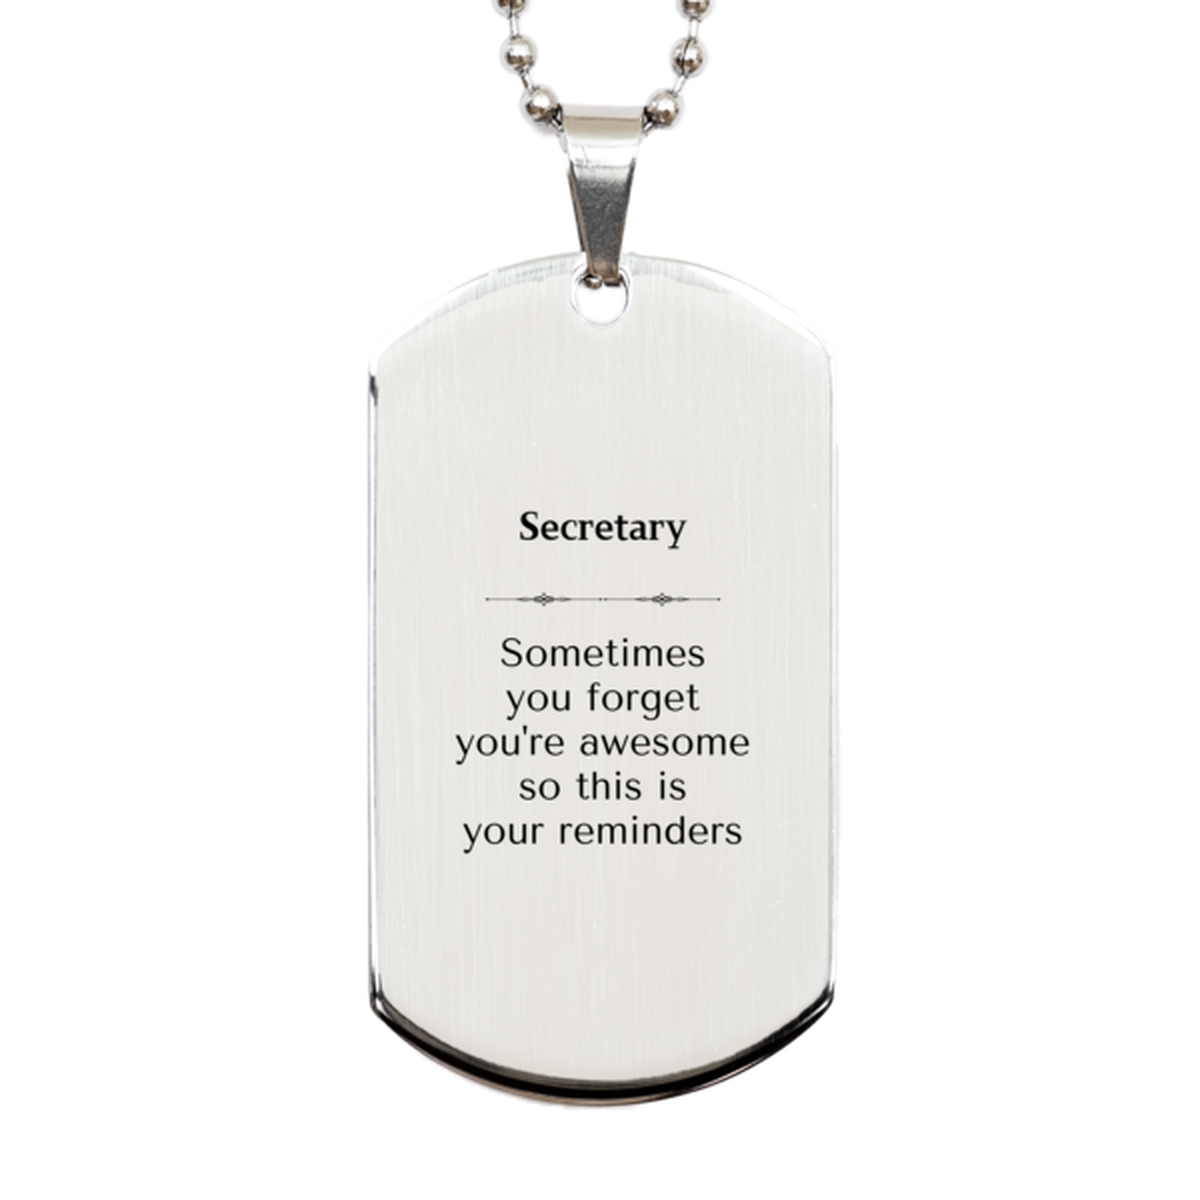 Sentimental Secretary Silver Dog Tag, Secretary Sometimes you forget you're awesome so this is your reminders, Graduation Christmas Birthday Gifts for Secretary, Men, Women, Coworkers